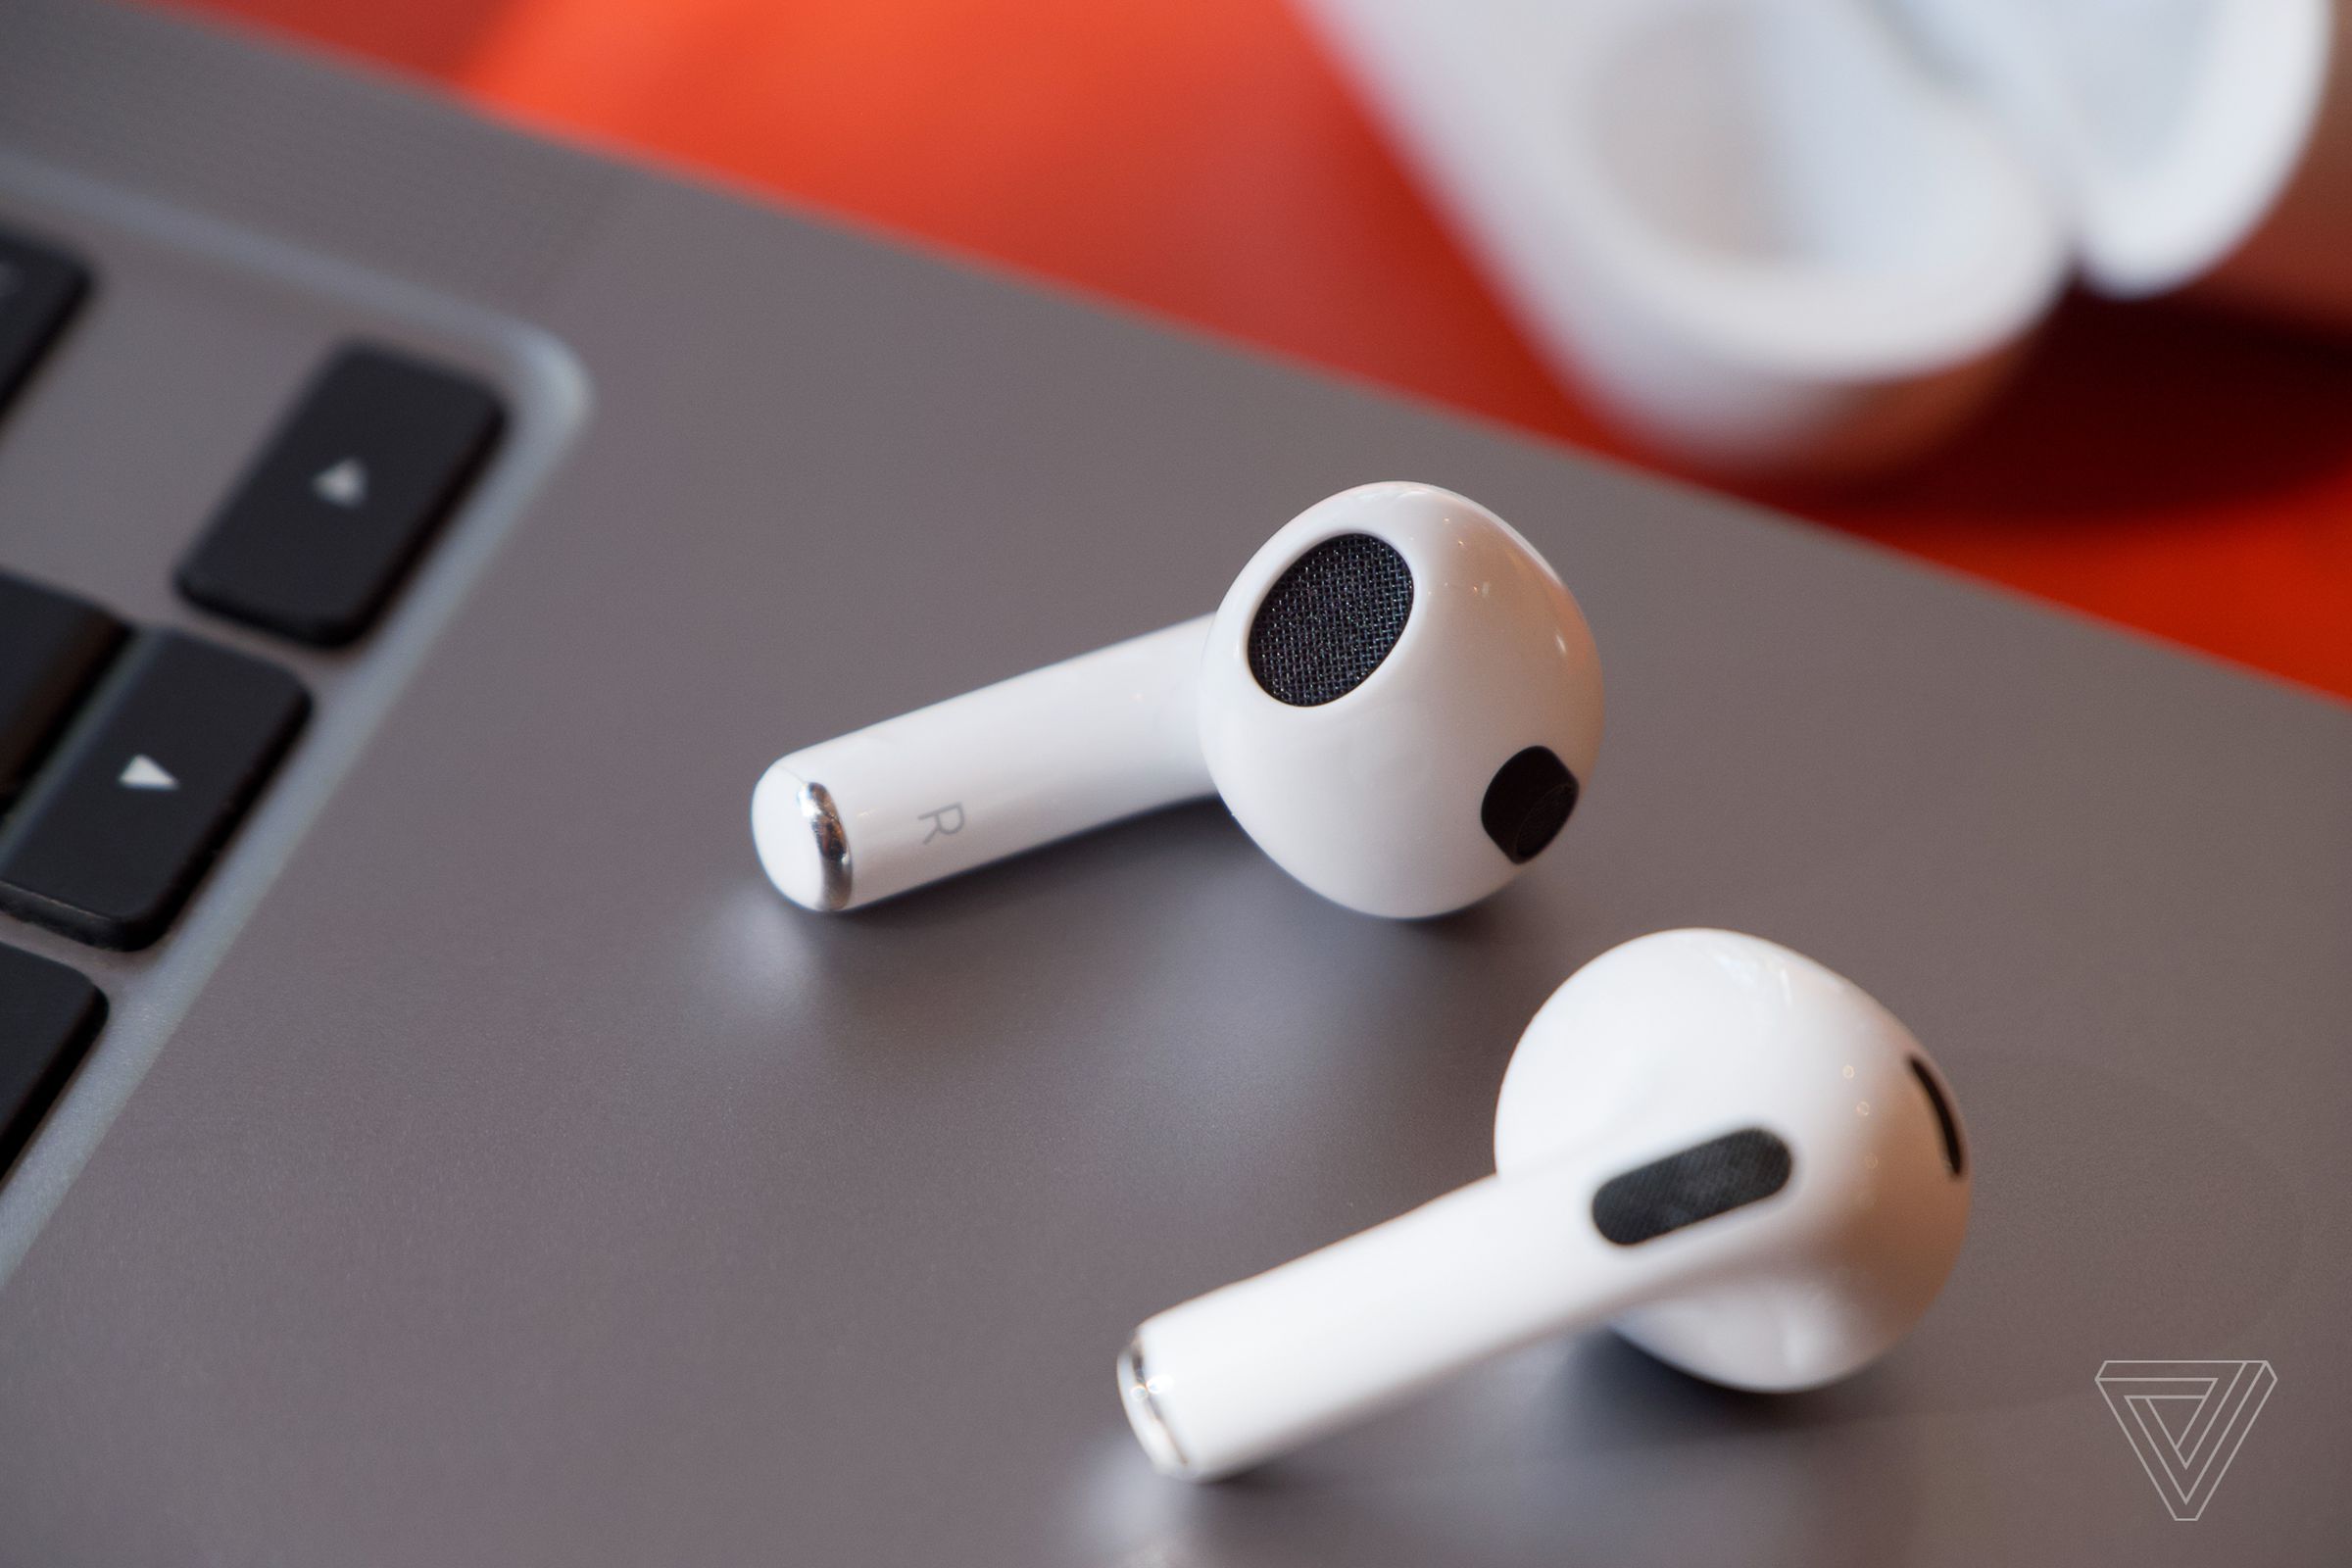 The latest AirPods tout great sound quality, not to mention some of the best voice call quality you can get in a pair of earbuds.